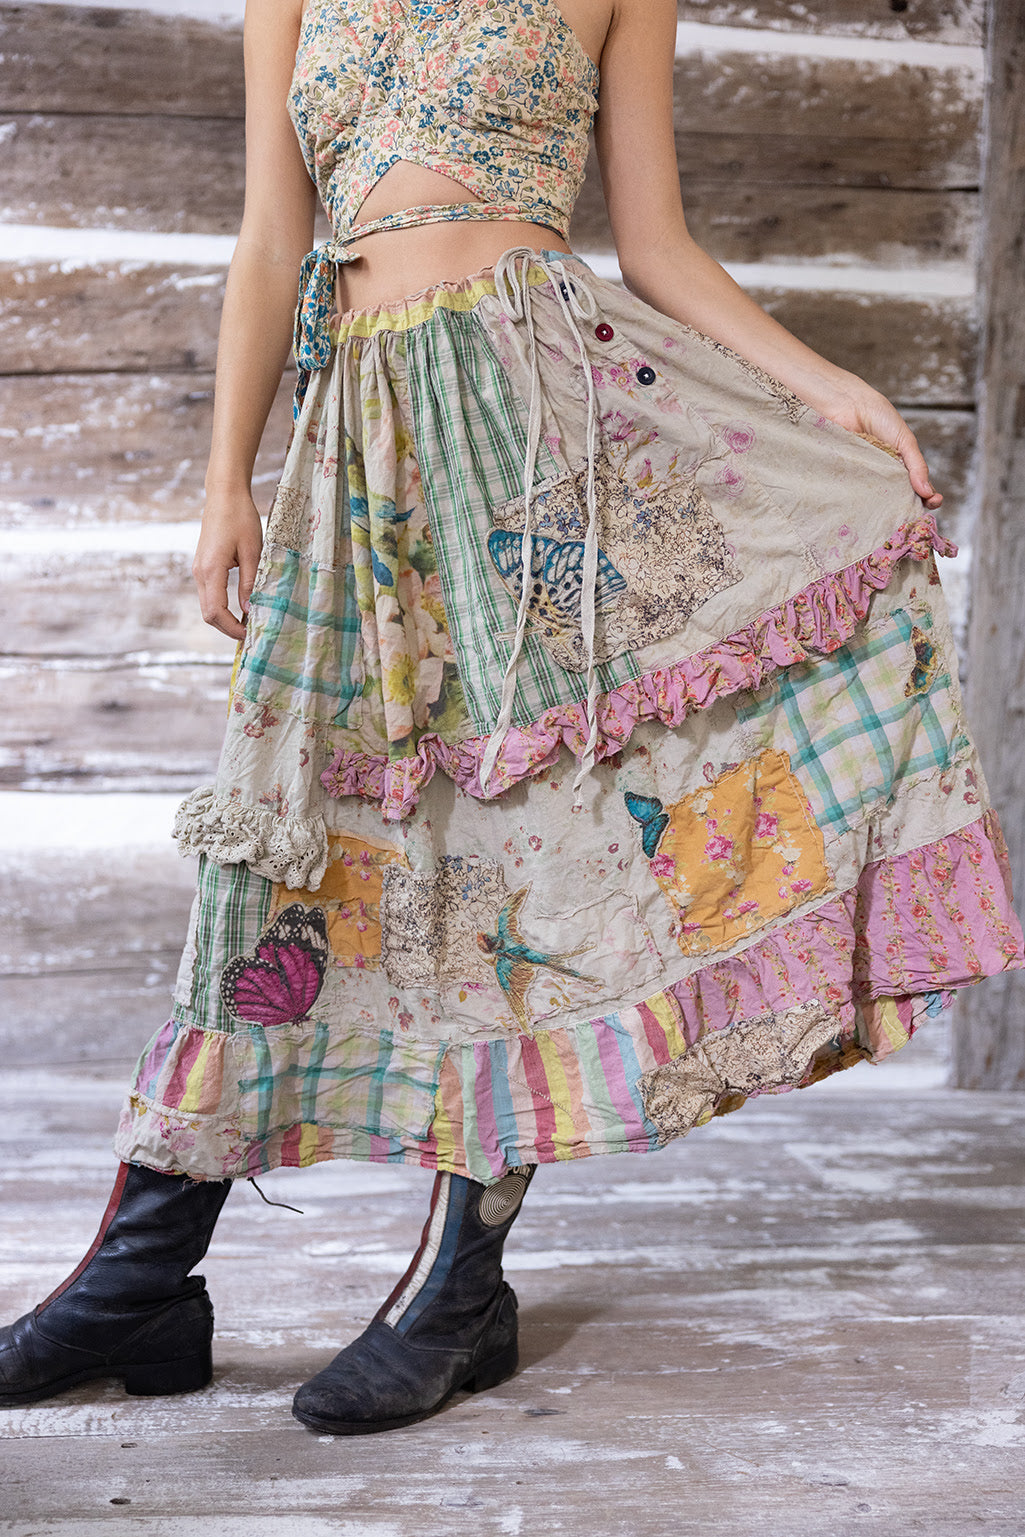 Patchwork Pixie Ruffle Skirt in Butterfly by Magnolia Pearl